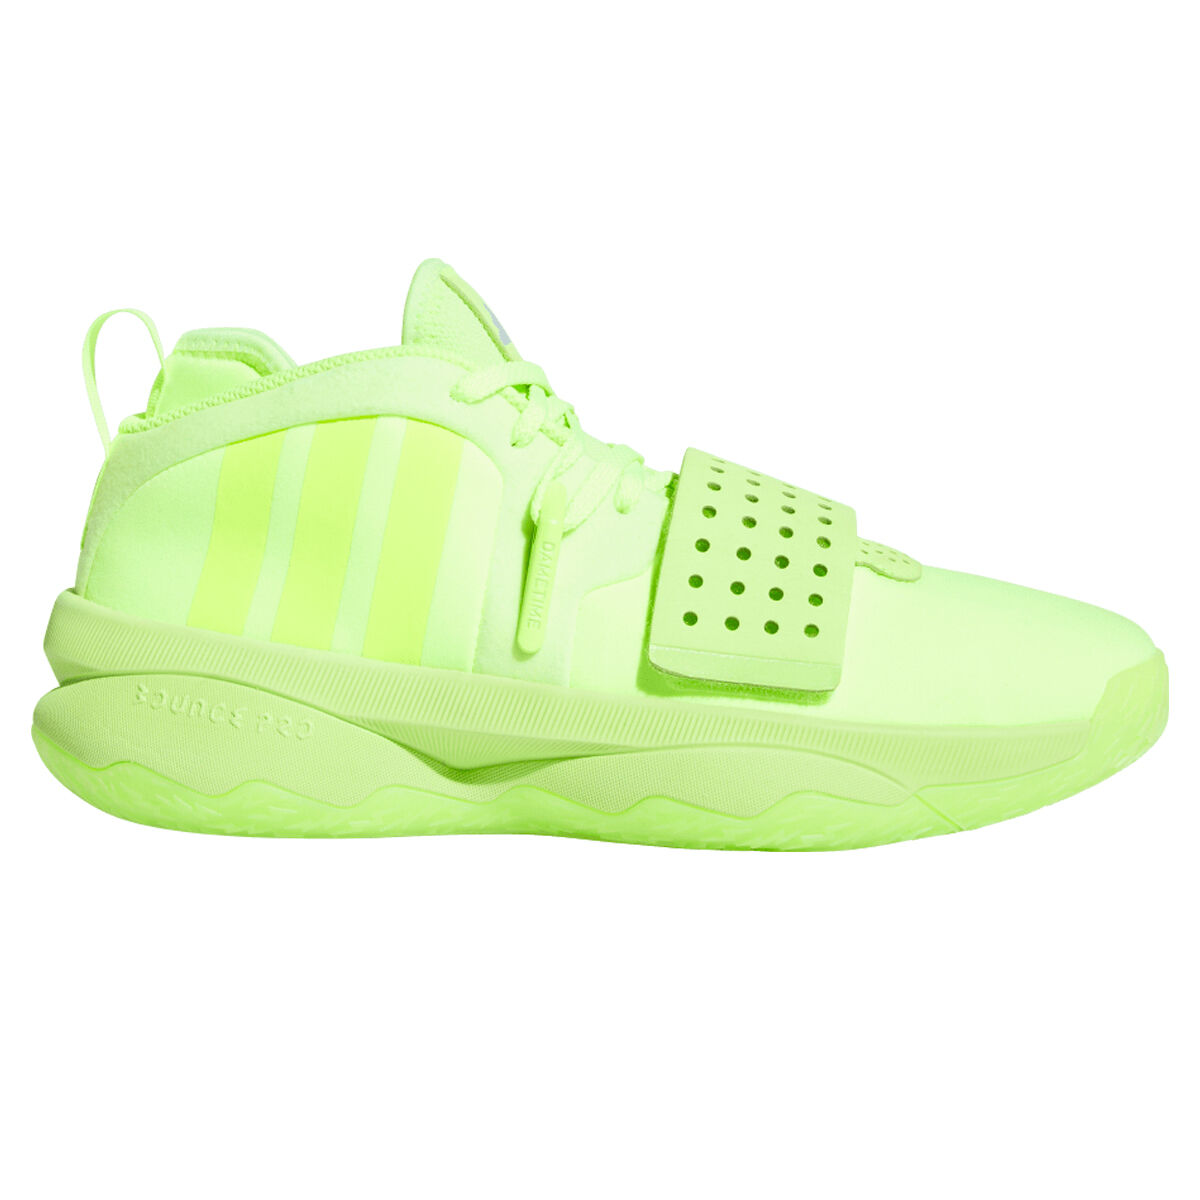 Red Grinch Mamba Basketball Shoes High Quality, Halo Venice Beach Style,  US4 12 Size From Love24shoes, $47.96 | DHgate.Com